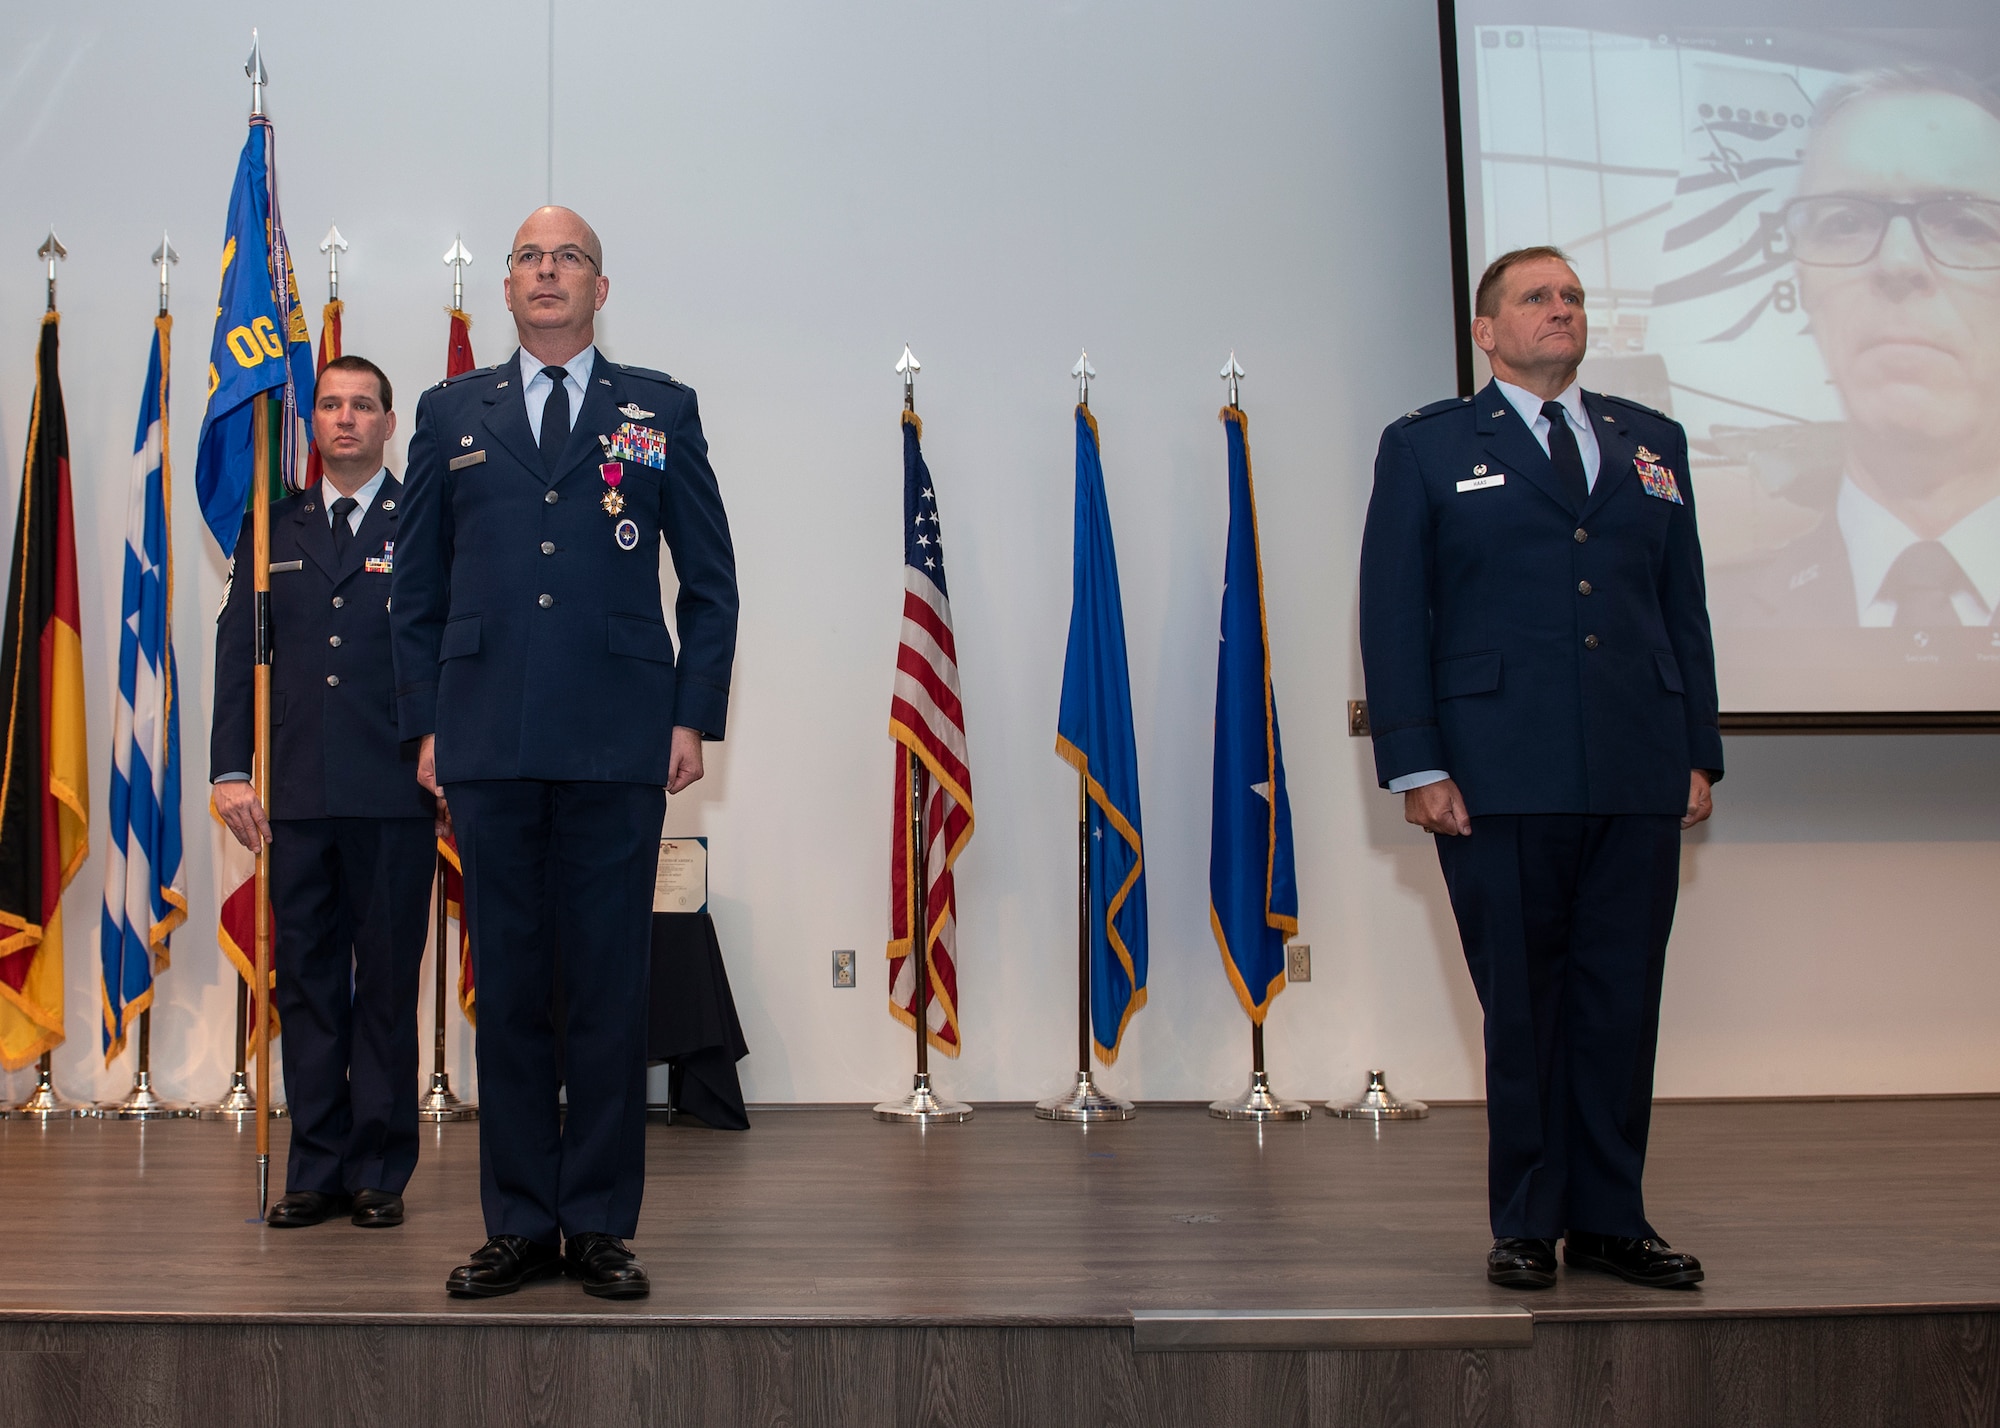 Driggers and Haas stand at attention during change of command ceremony